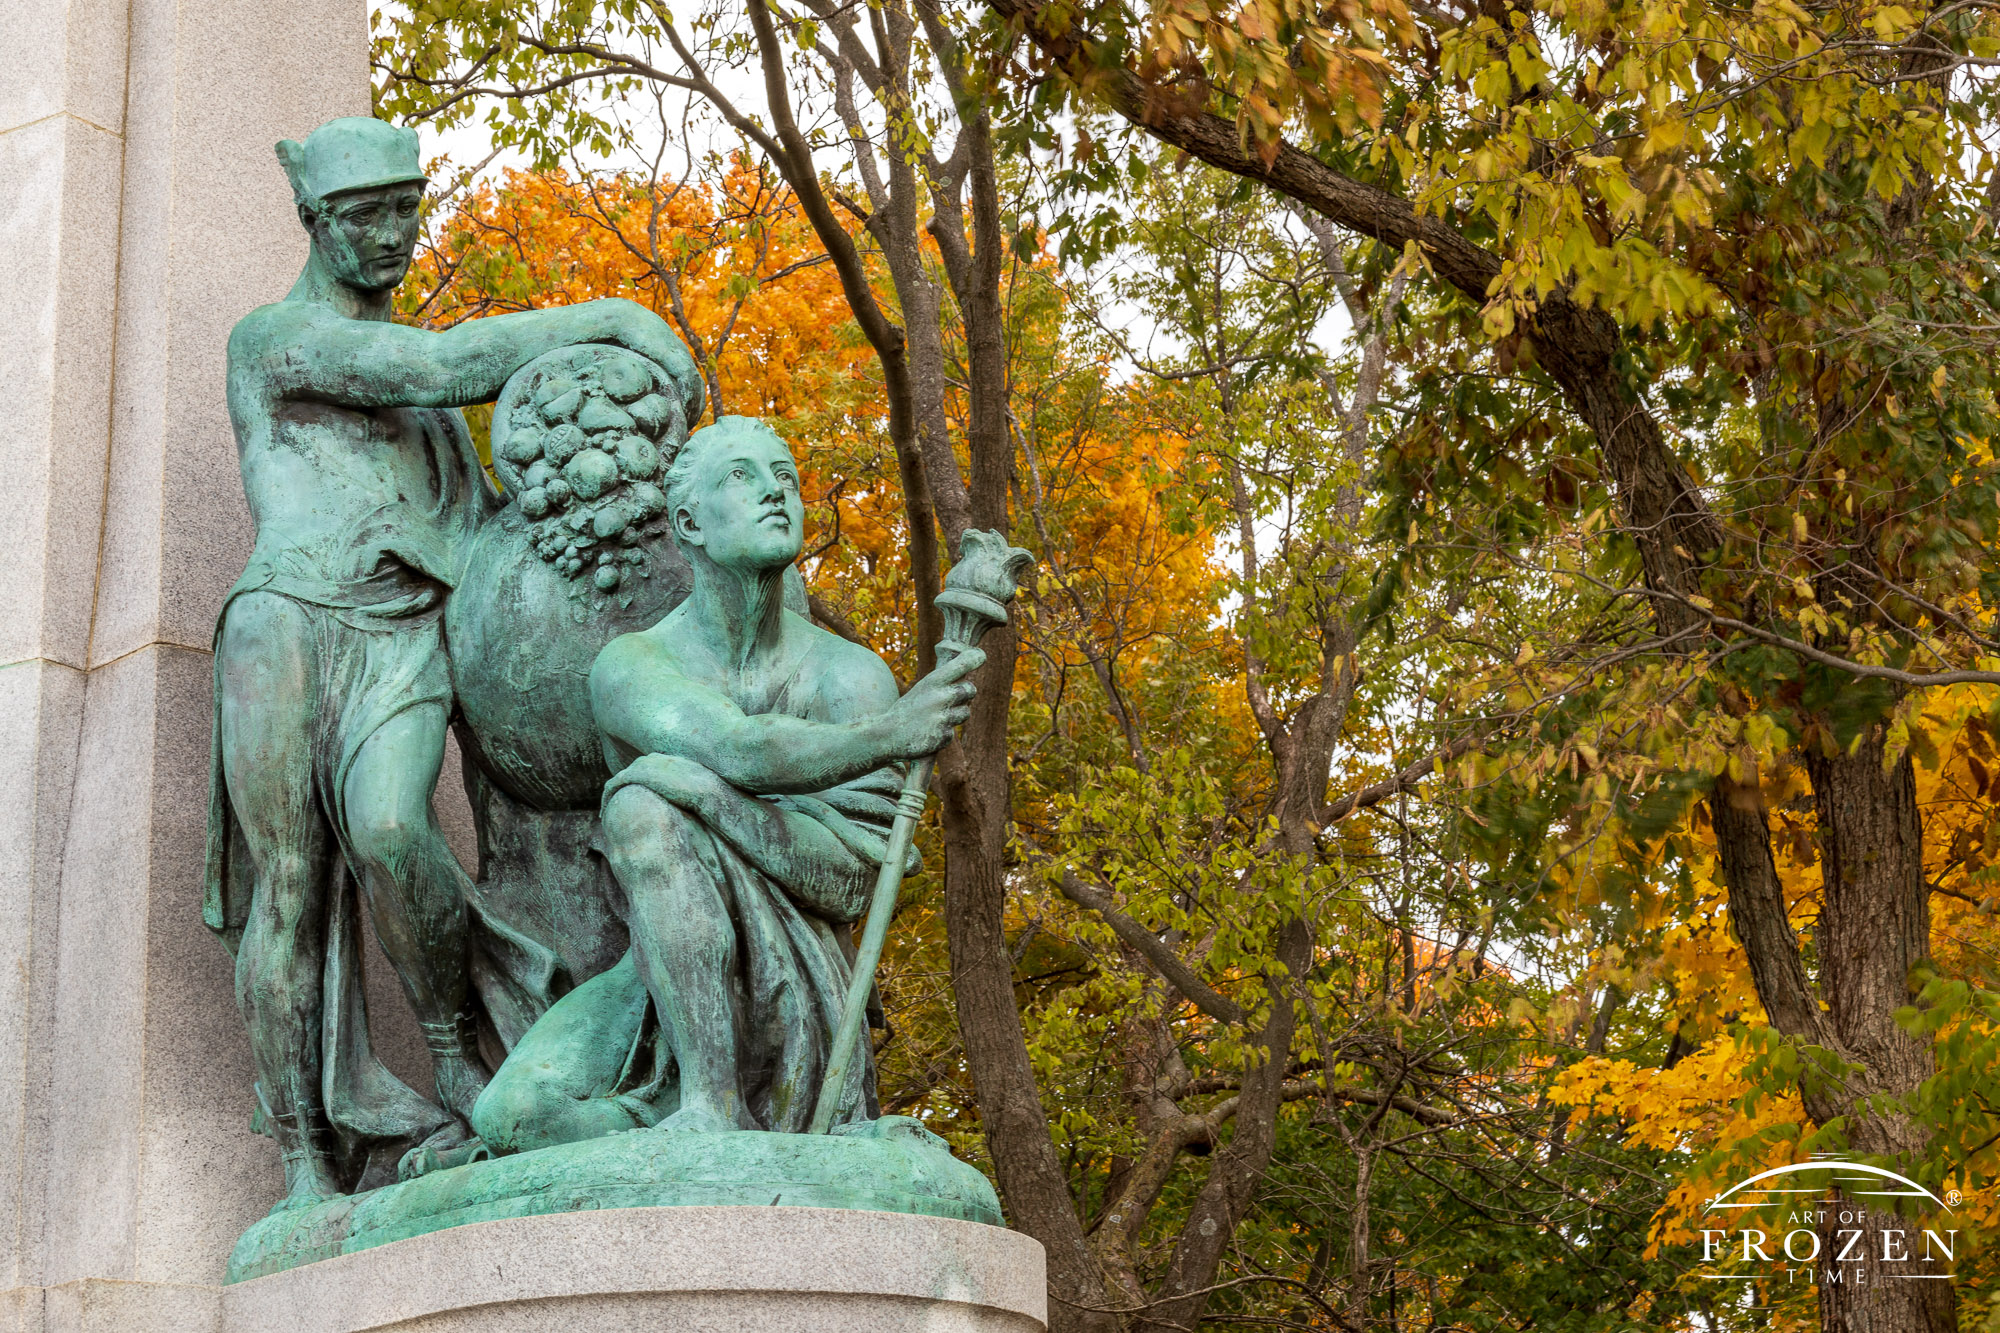 A bronze subgroup of John H. Patterson’s Memorial depicting two men, one holding a cornucopia on a globe while the other kneels and holds a torch and stares skyward, symbolizing Patterson’s progress and prosperity pursuits.